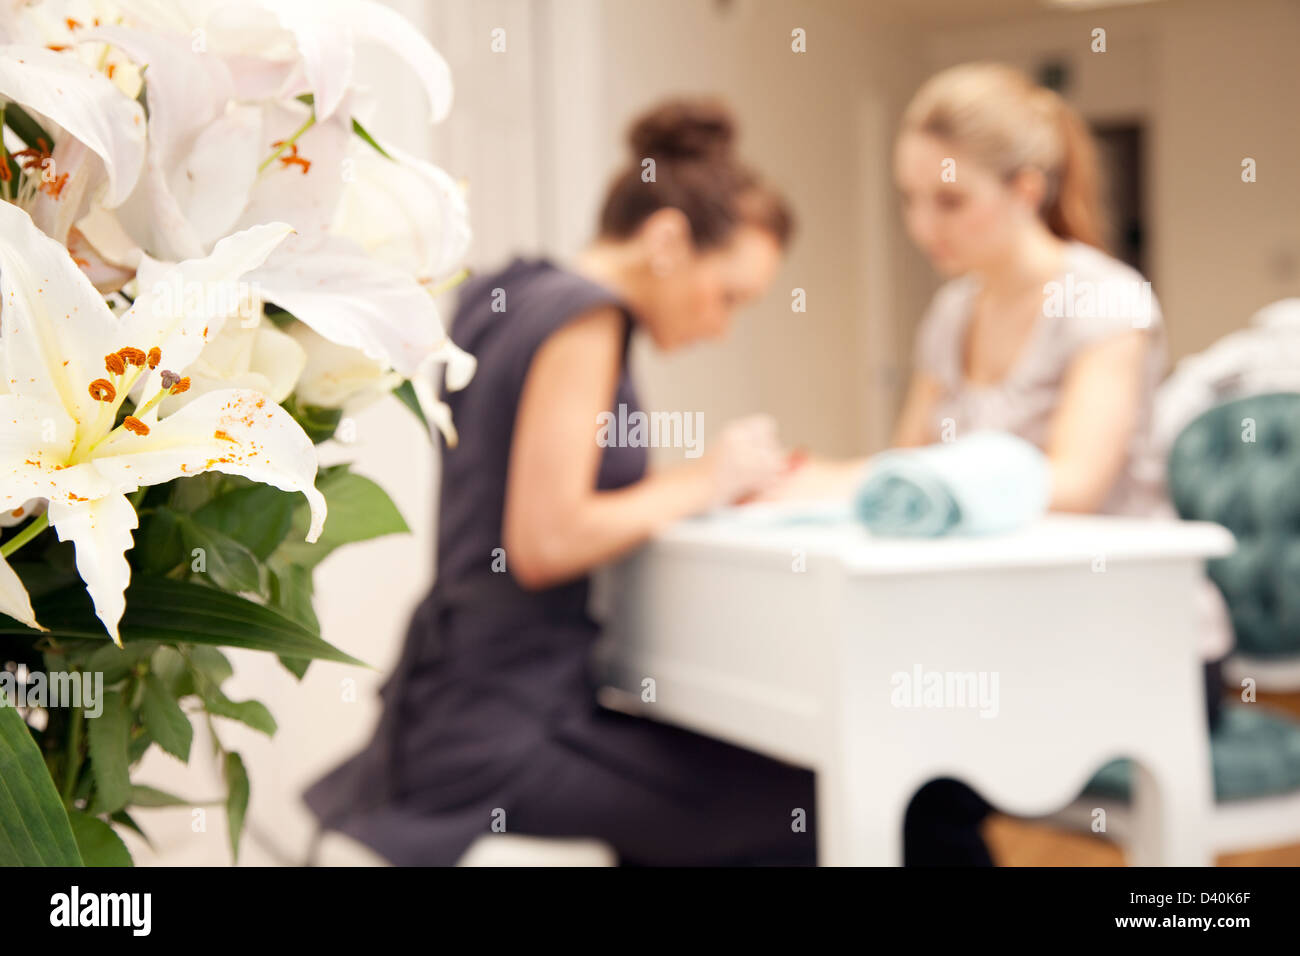 A young woman having her nails painted in a beauty salon. The subjects are in the background with a vase of flowers to the left Stock Photo